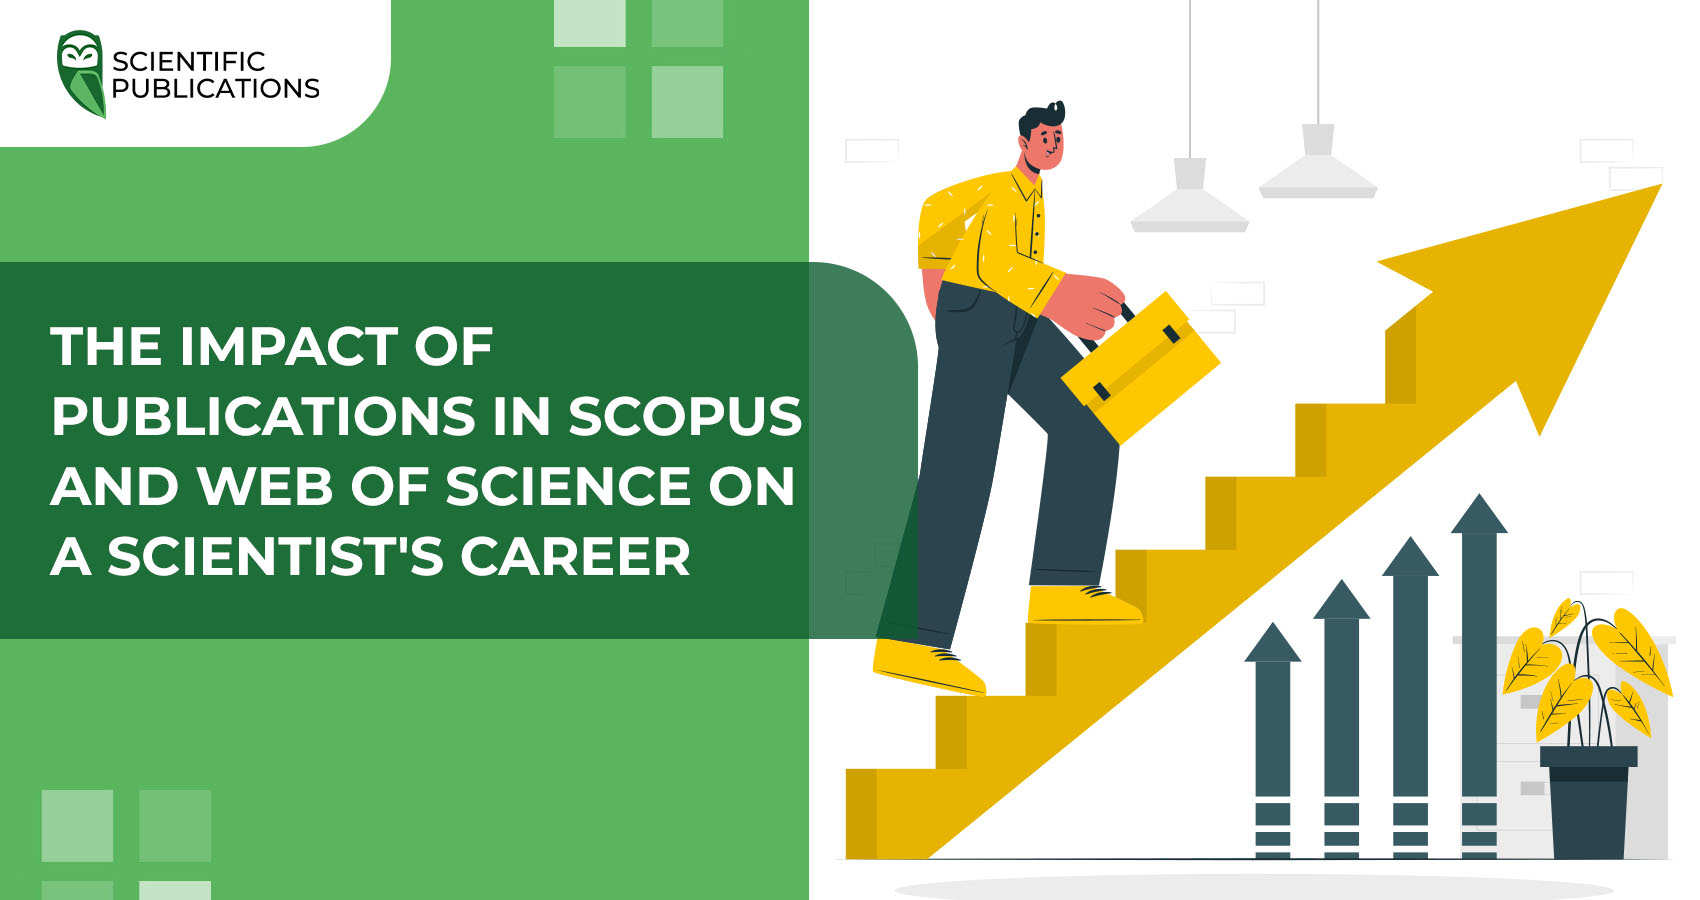 The impact of publications in Scopus and Web of Science on a scientist's career